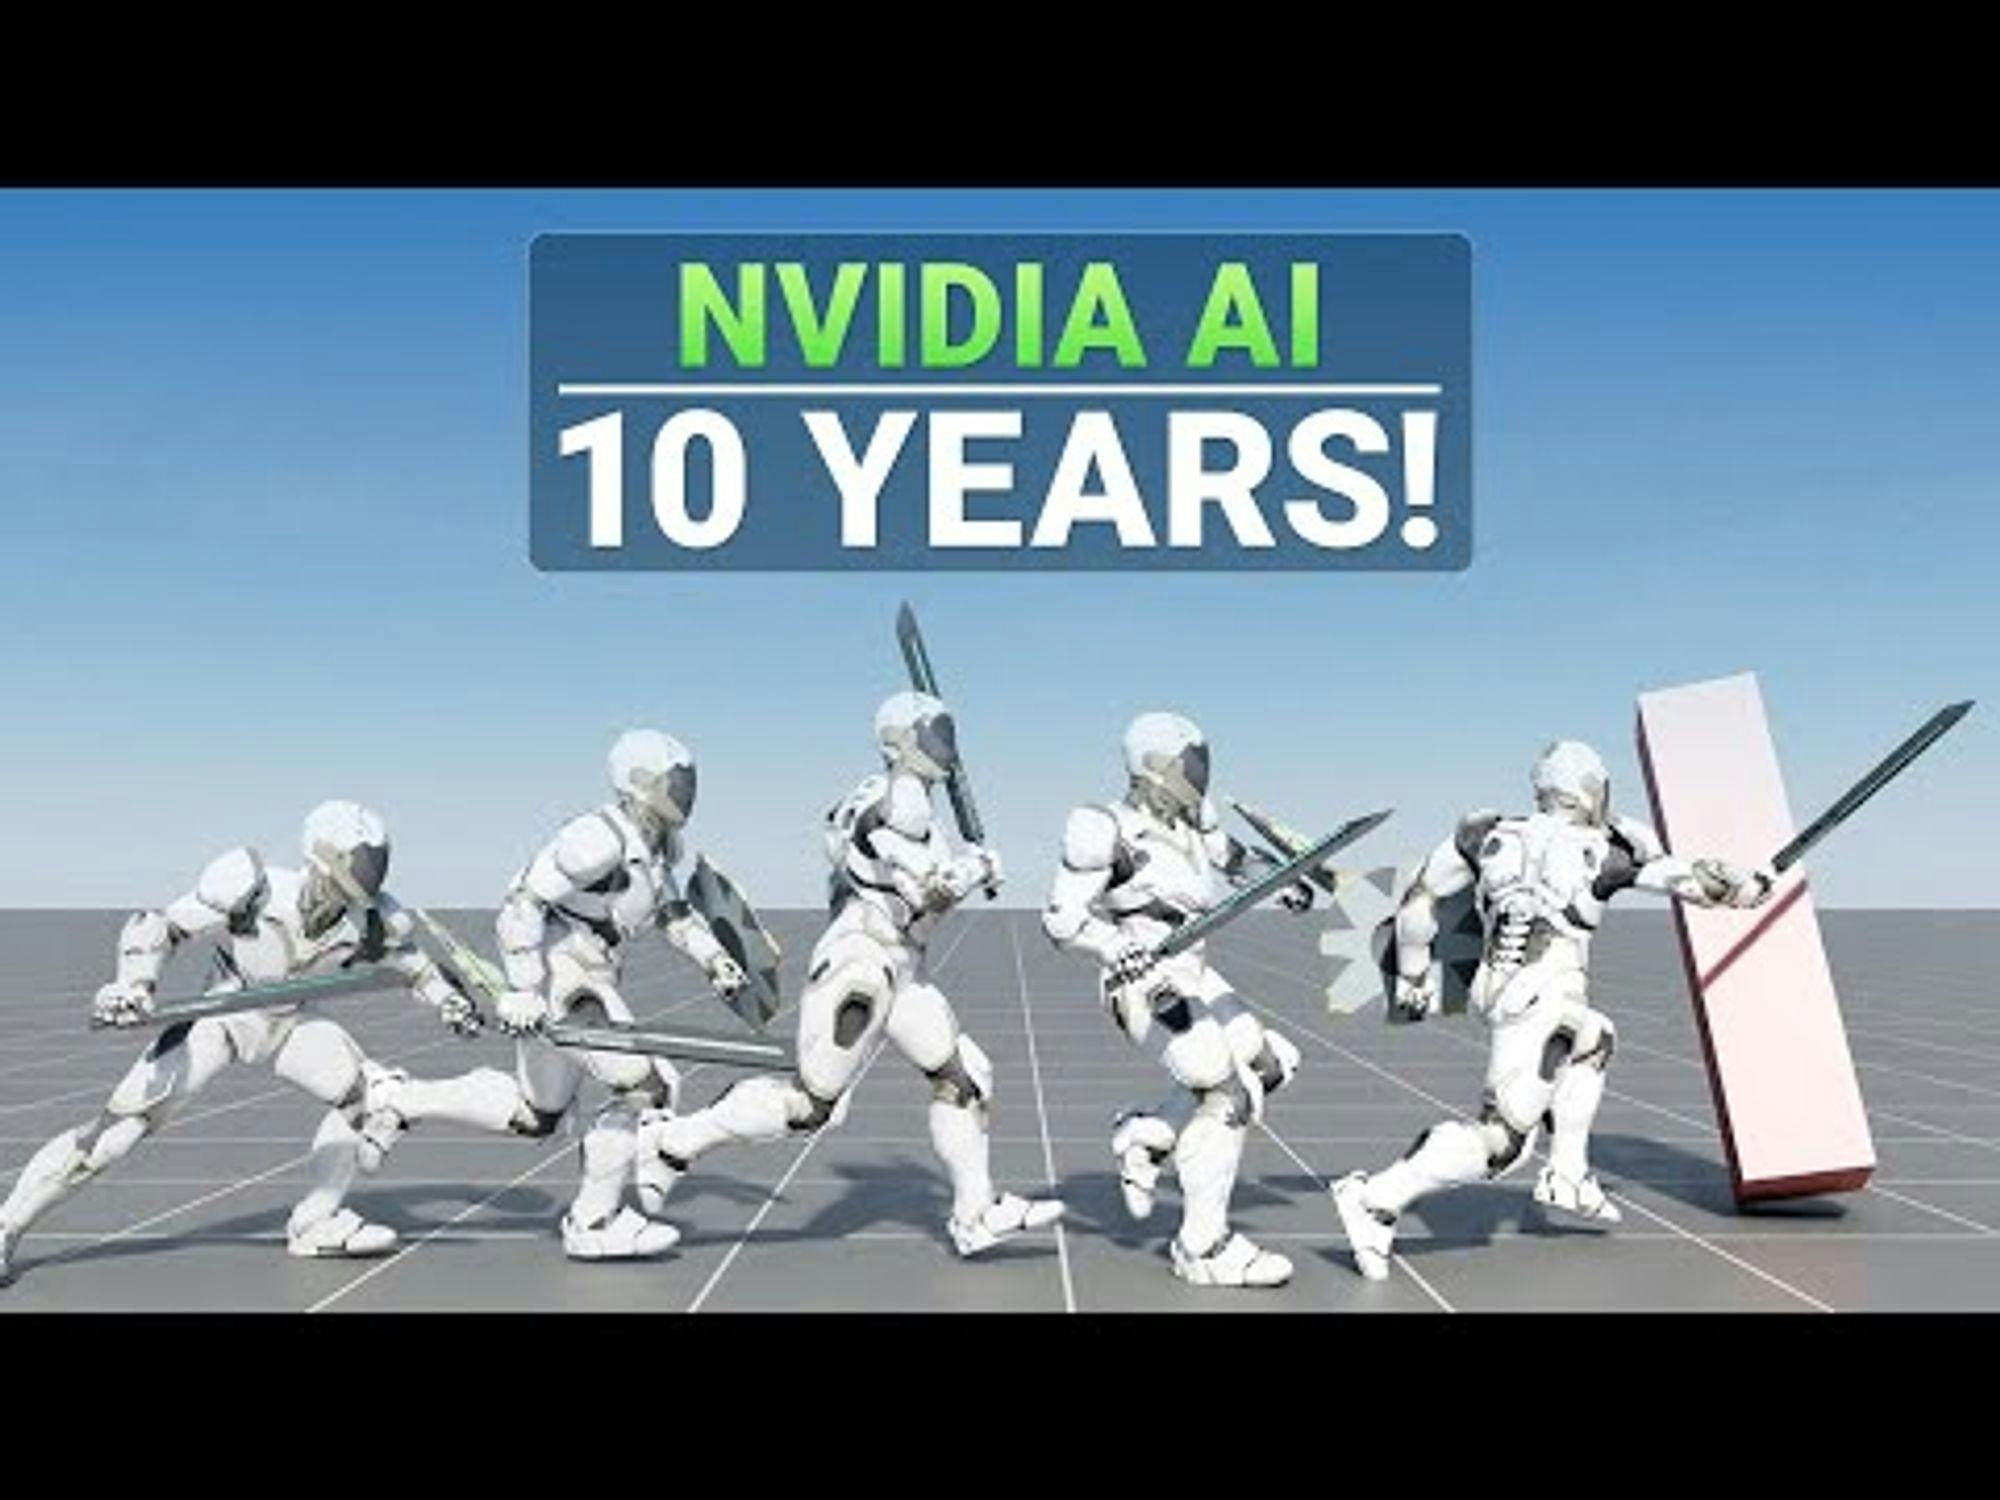 NVIDIA's New AI Trained For 10 Years! But How? 🤺